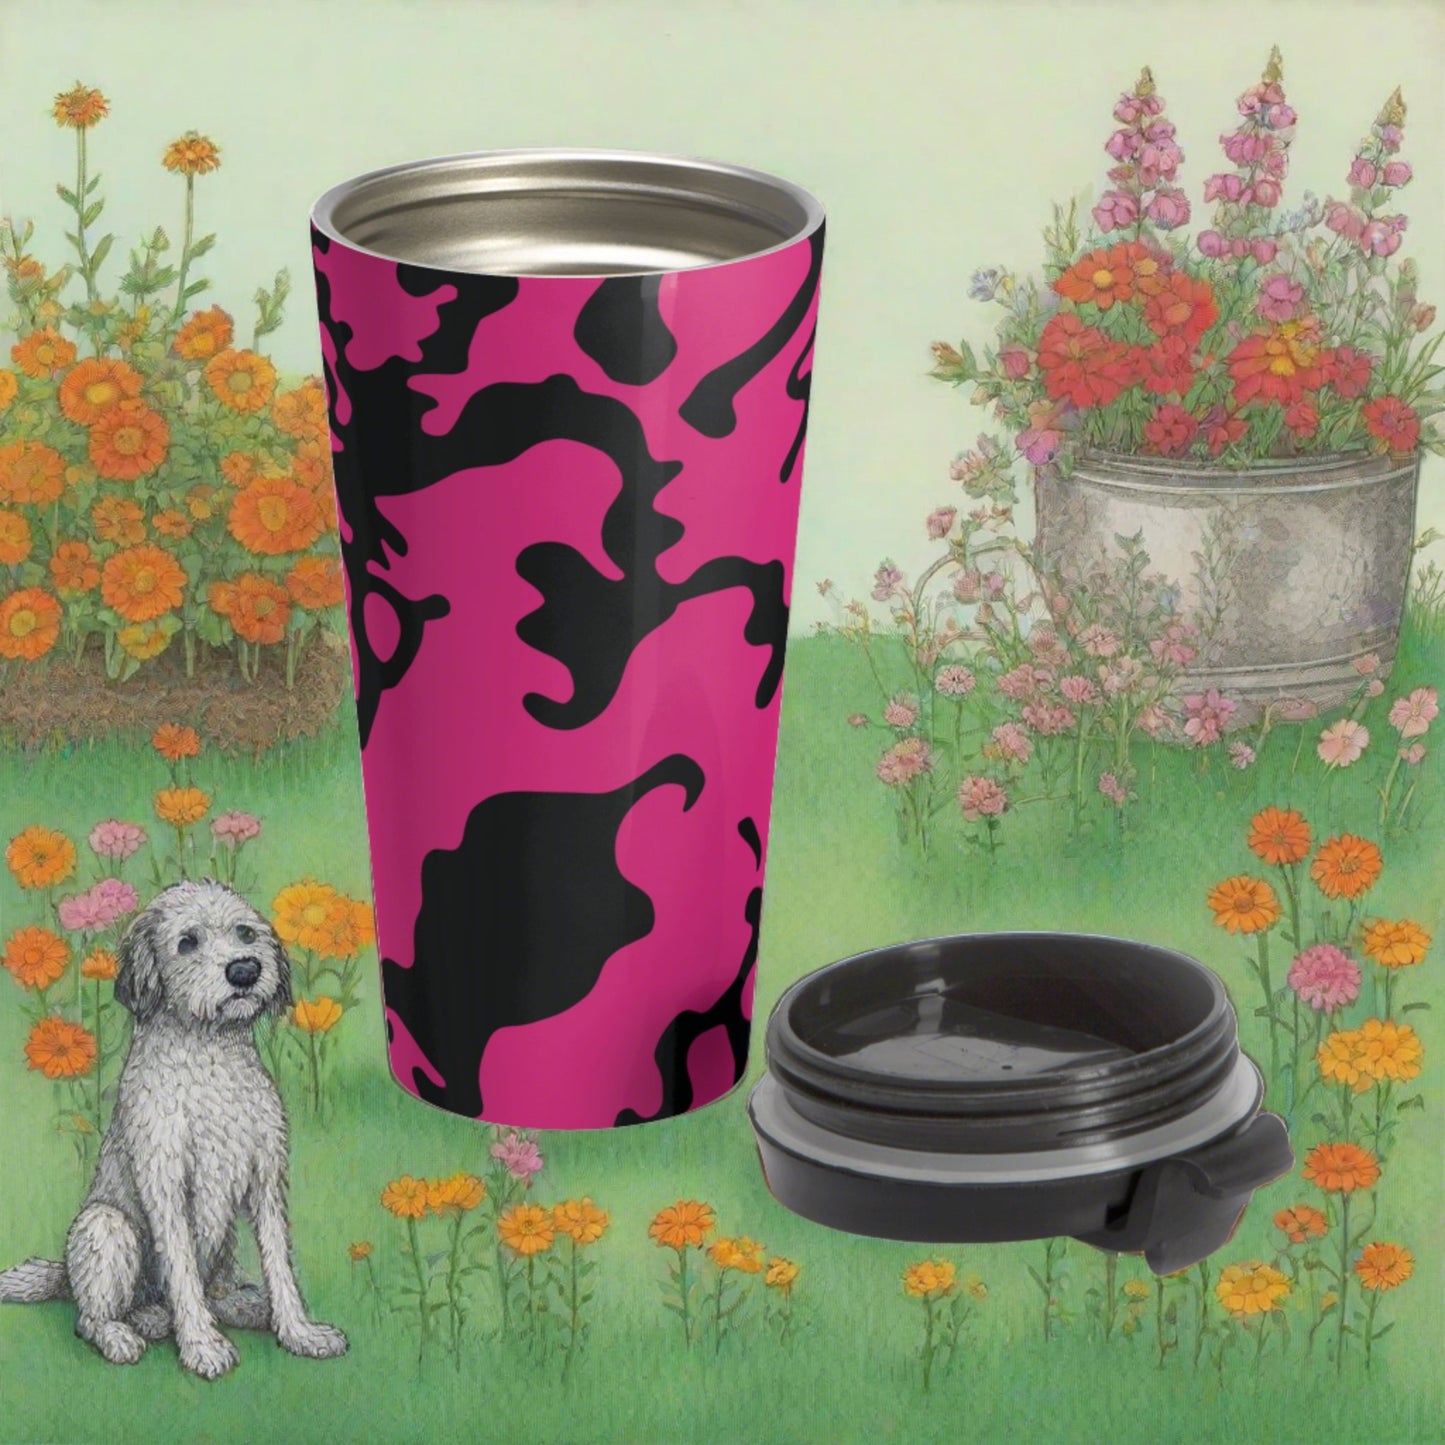 Stainless Steel Travel Mug With Cup 15oz (440ml)| Camouflage Fuchsia & Black Design